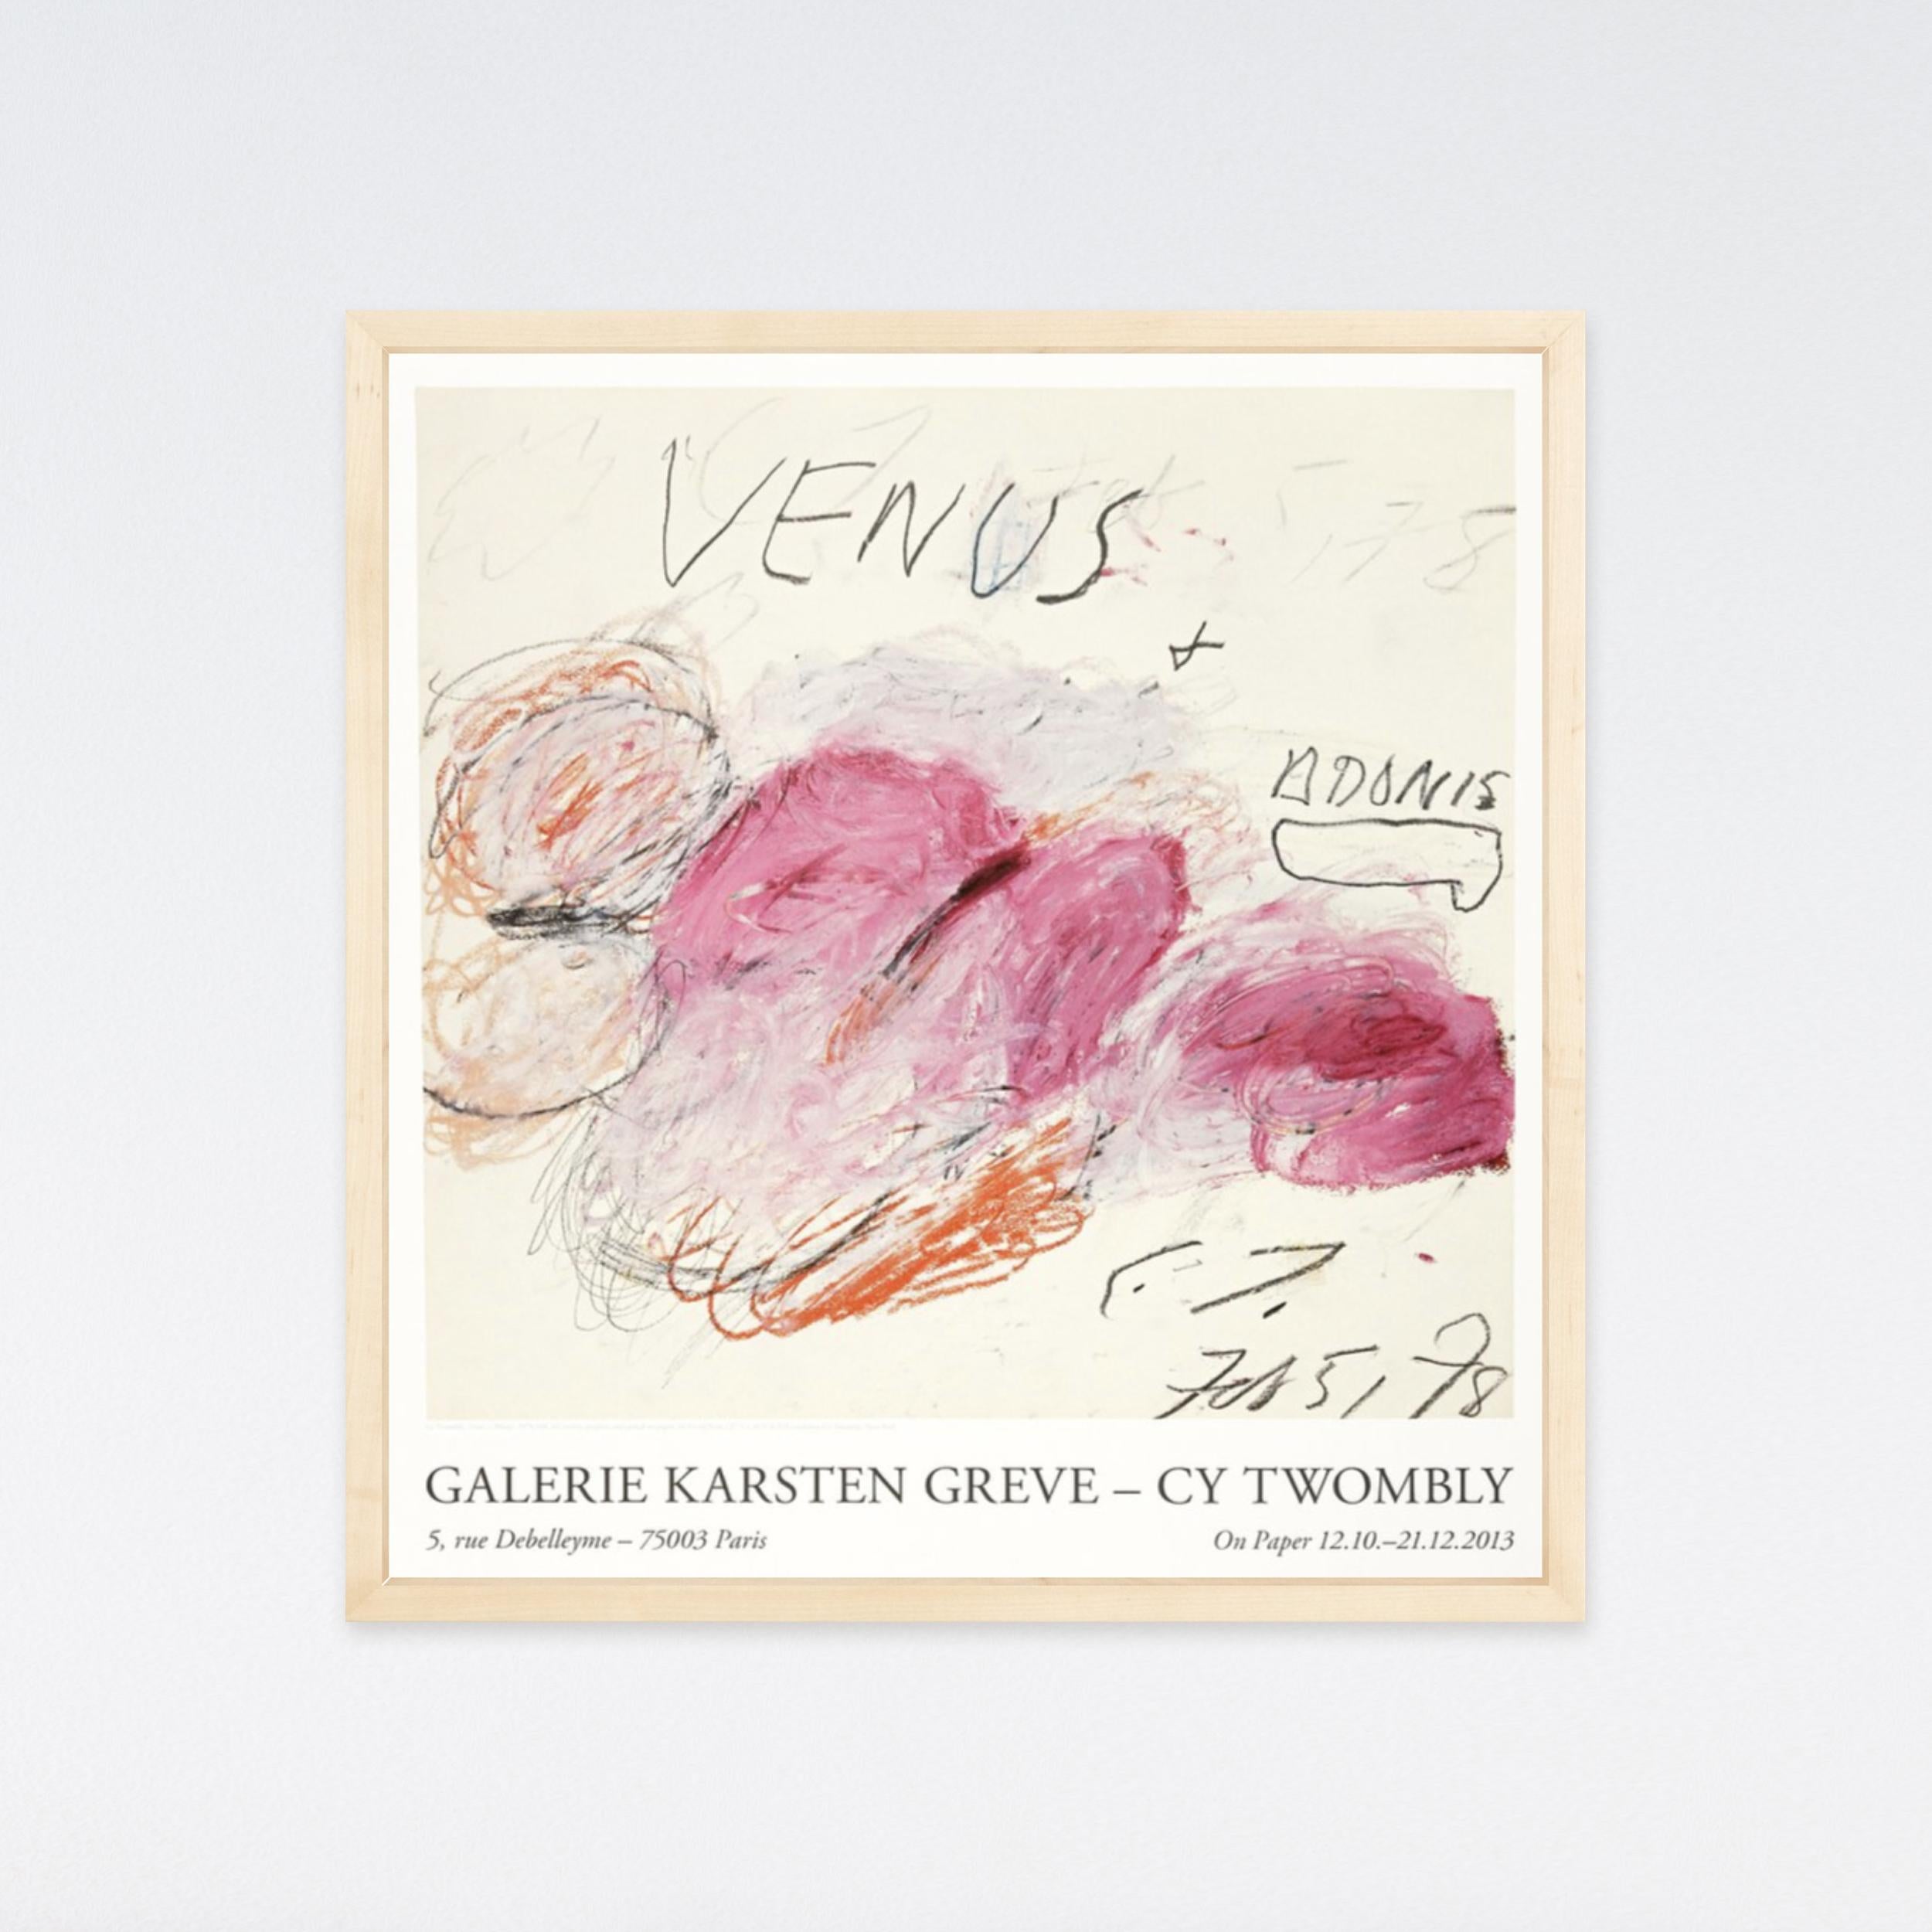 Cy Twombly, Venus + Adonis - On Paper,  2013 Exhibition Poster - Beige Abstract Print by (after) Cy Twombly